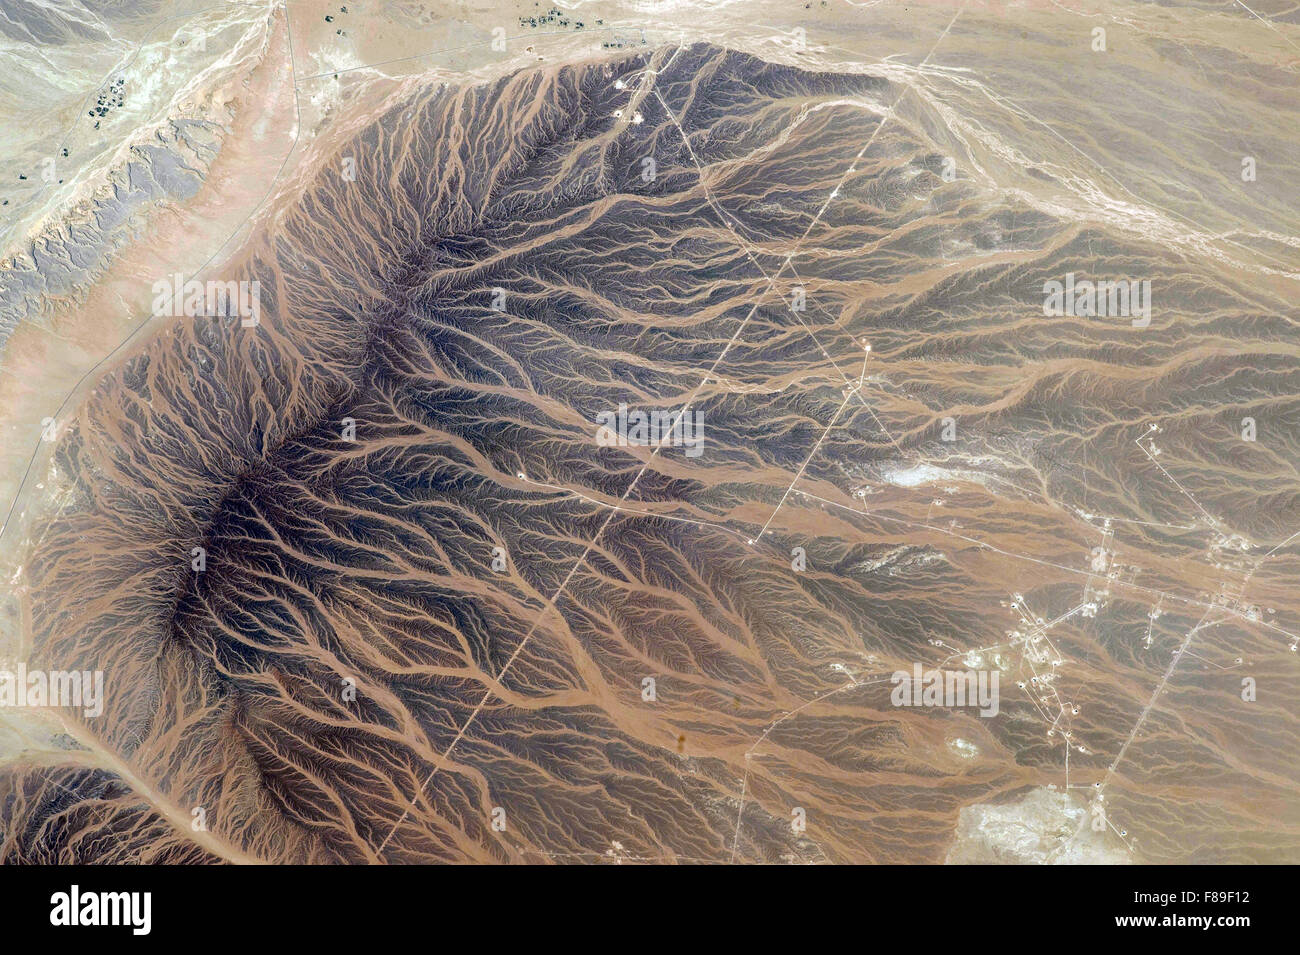 Dried-up riverbeds in Oman, Oman Stock Photo